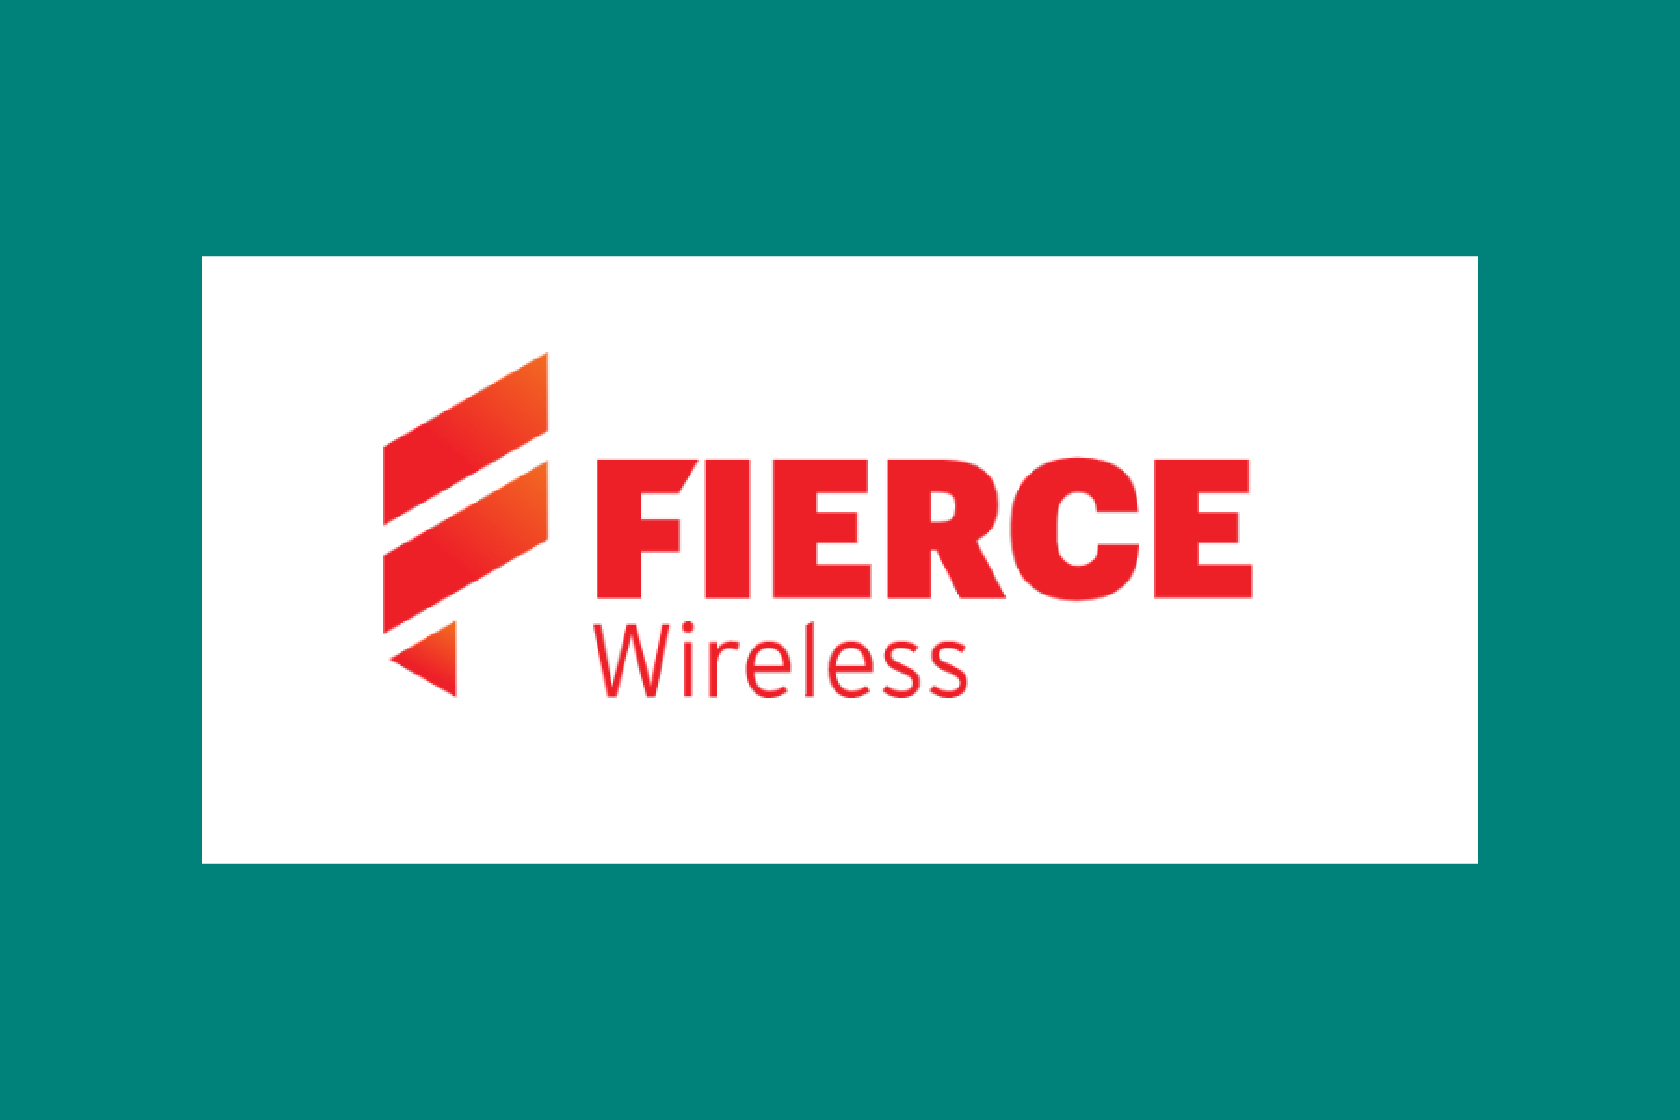 Fierce Wireless logo: A bold and dynamic logo featuring the words "Fierce Wireless" in a strong and impactful font.